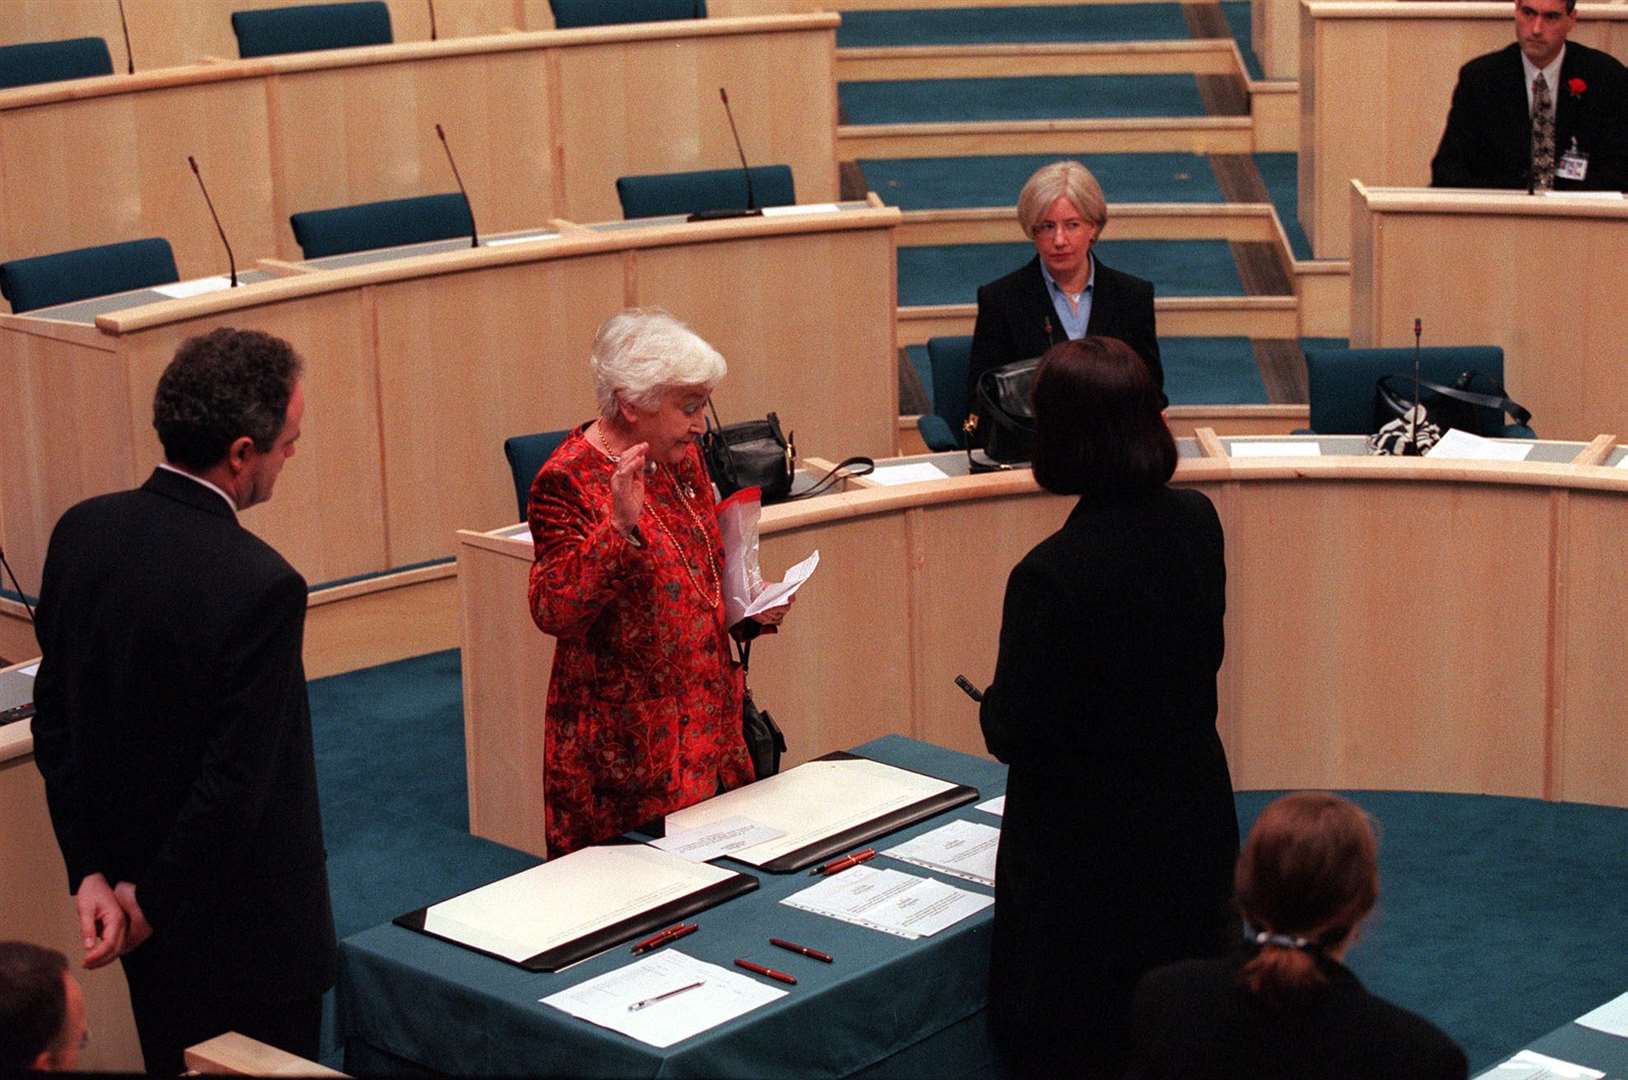 Winnie Ewing swearing in on the first day of the Scottish Parliament (Ben Curtis/PA)